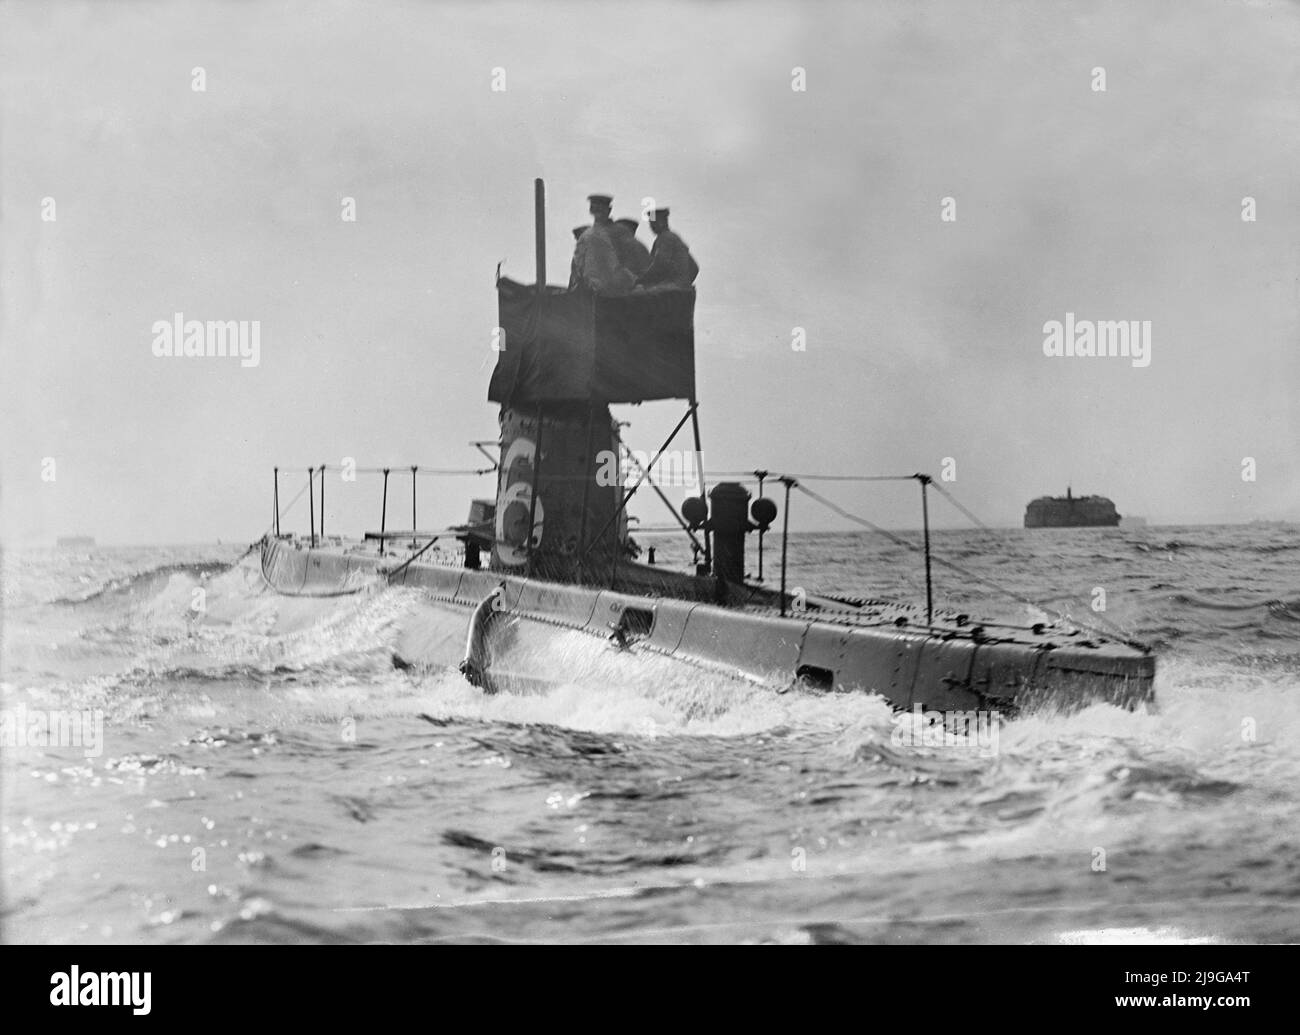 A vintage photo circa 1914 of the Royal Navy submarine HMS B6 cruising on the surface in the Solent. Launched 30 November 1905 she served during World War One based at Gibraltar and later deployed to the Eastern Mediterranean for service during the Gallipoli Campaign. She was eventually scrapped in 1921 Stock Photo